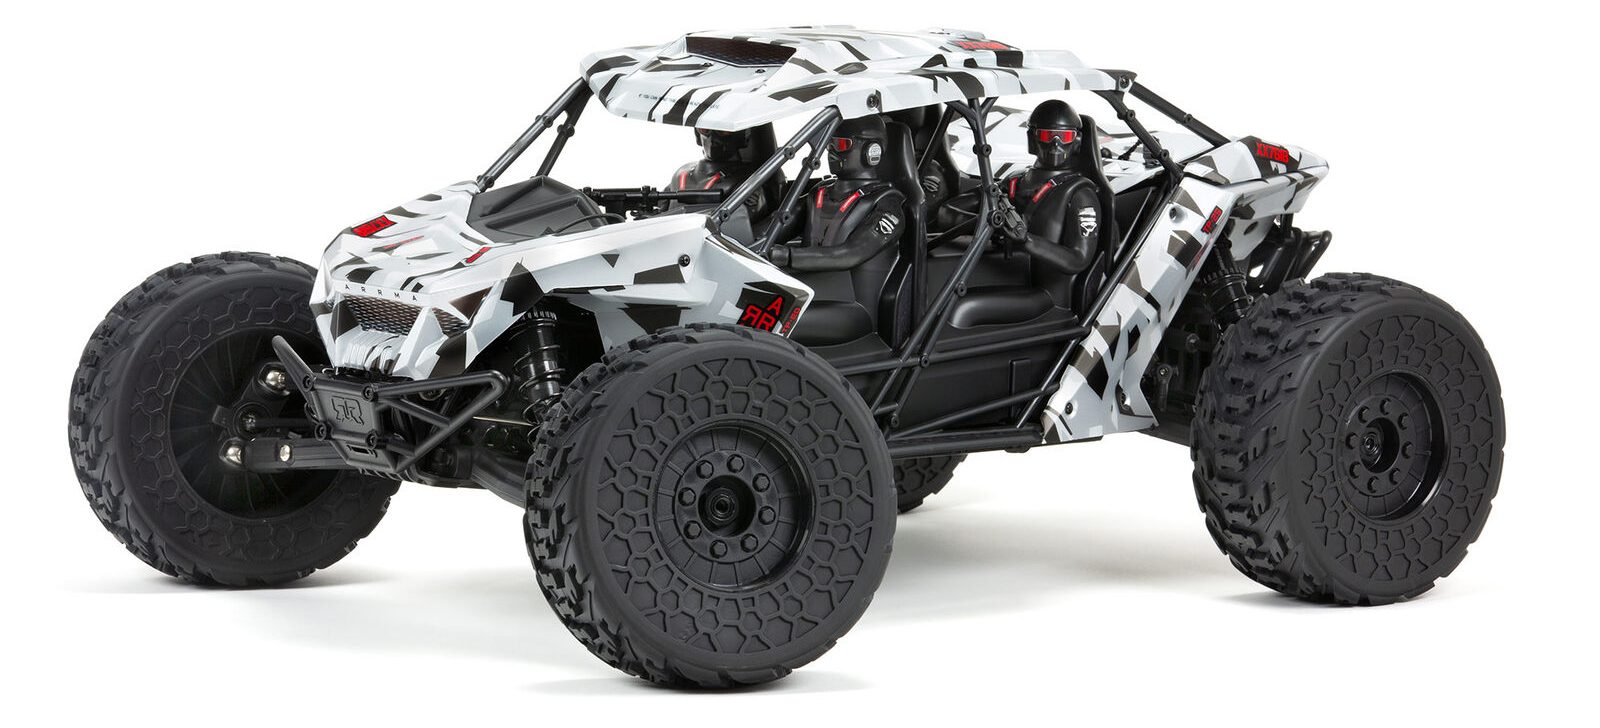 Arrma’s Remarkable 1/7-Scale RTR Vehicles